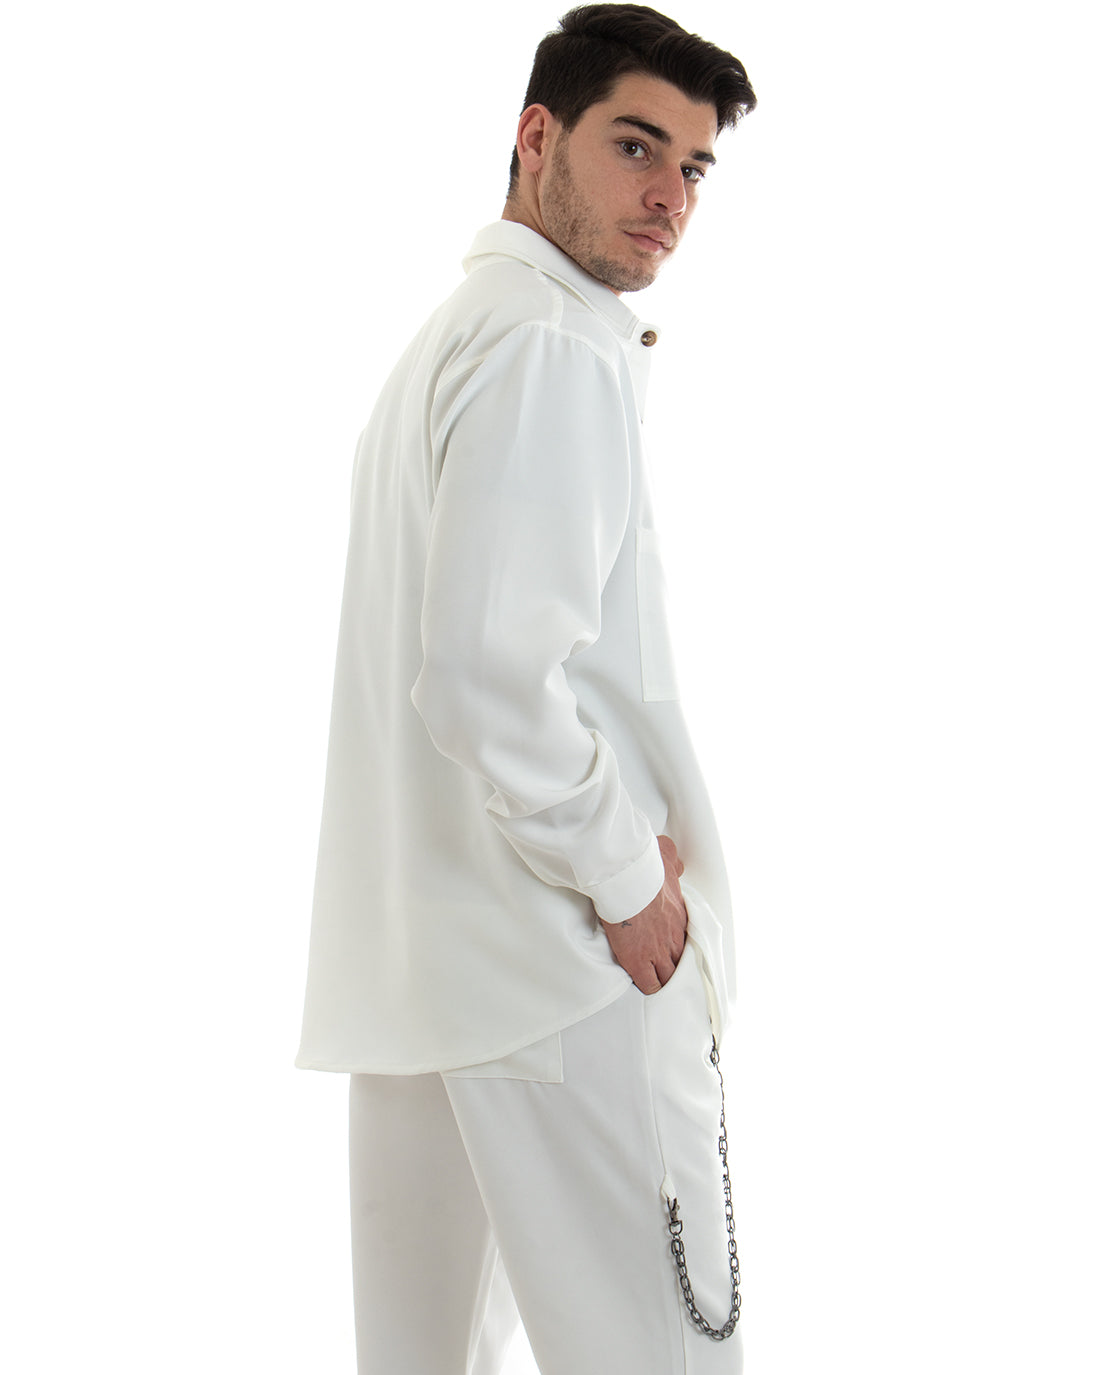 Complete Coordinated Set for Men Viscose Shirt With Collar Trousers Outfit White GIOSAL-OU2254A